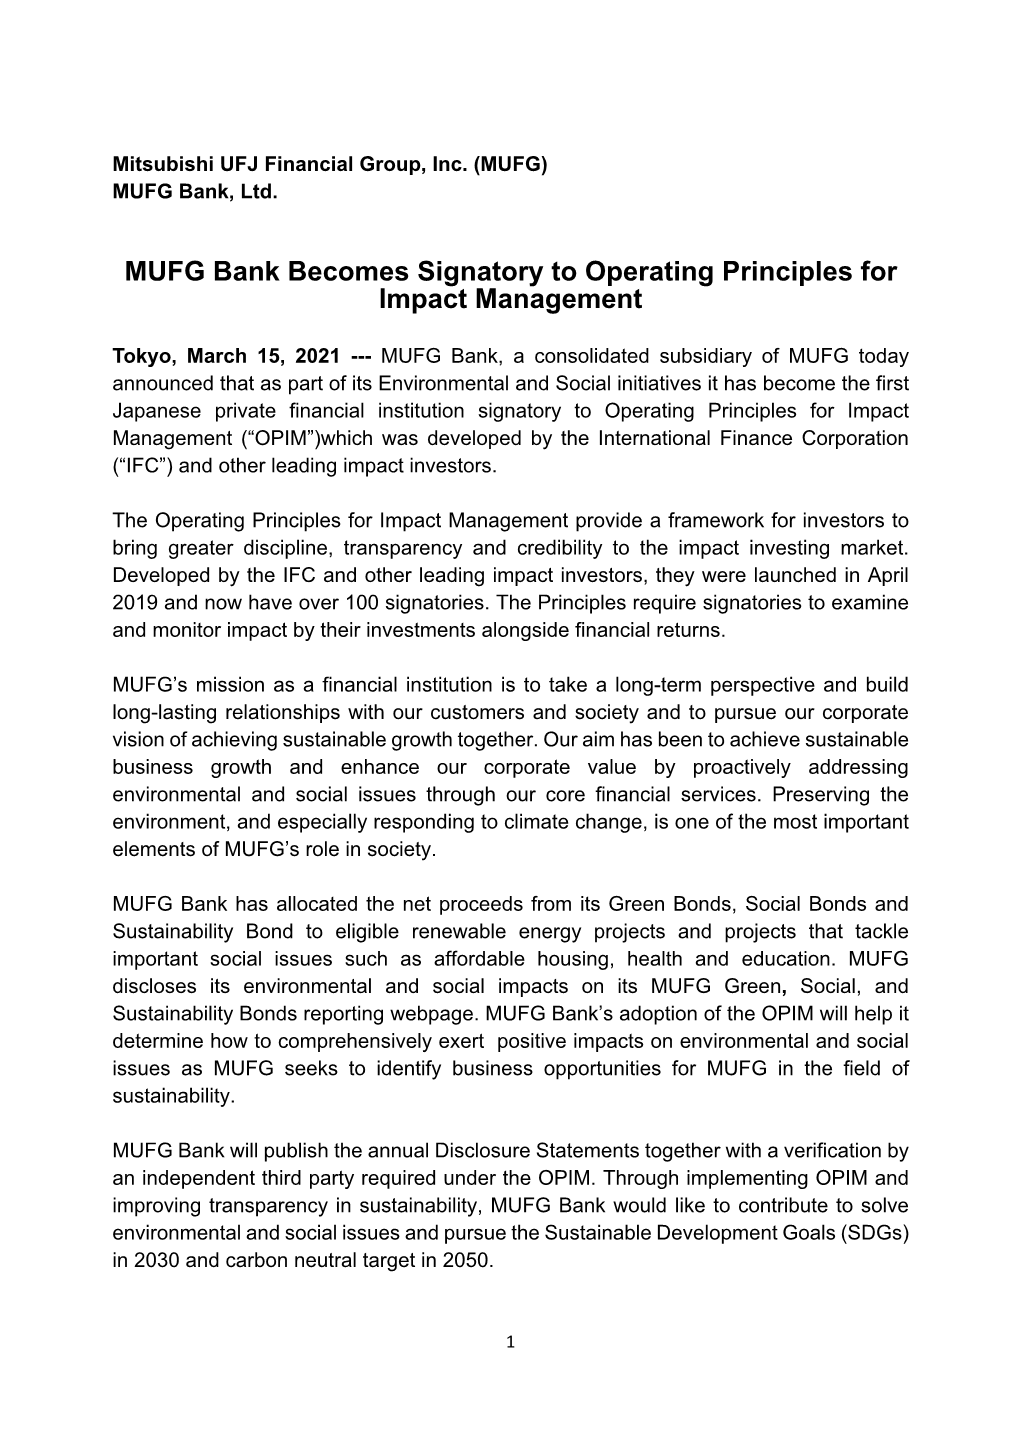 MUFG Bank Becomes Signatory to Operating Principles for Impact Management